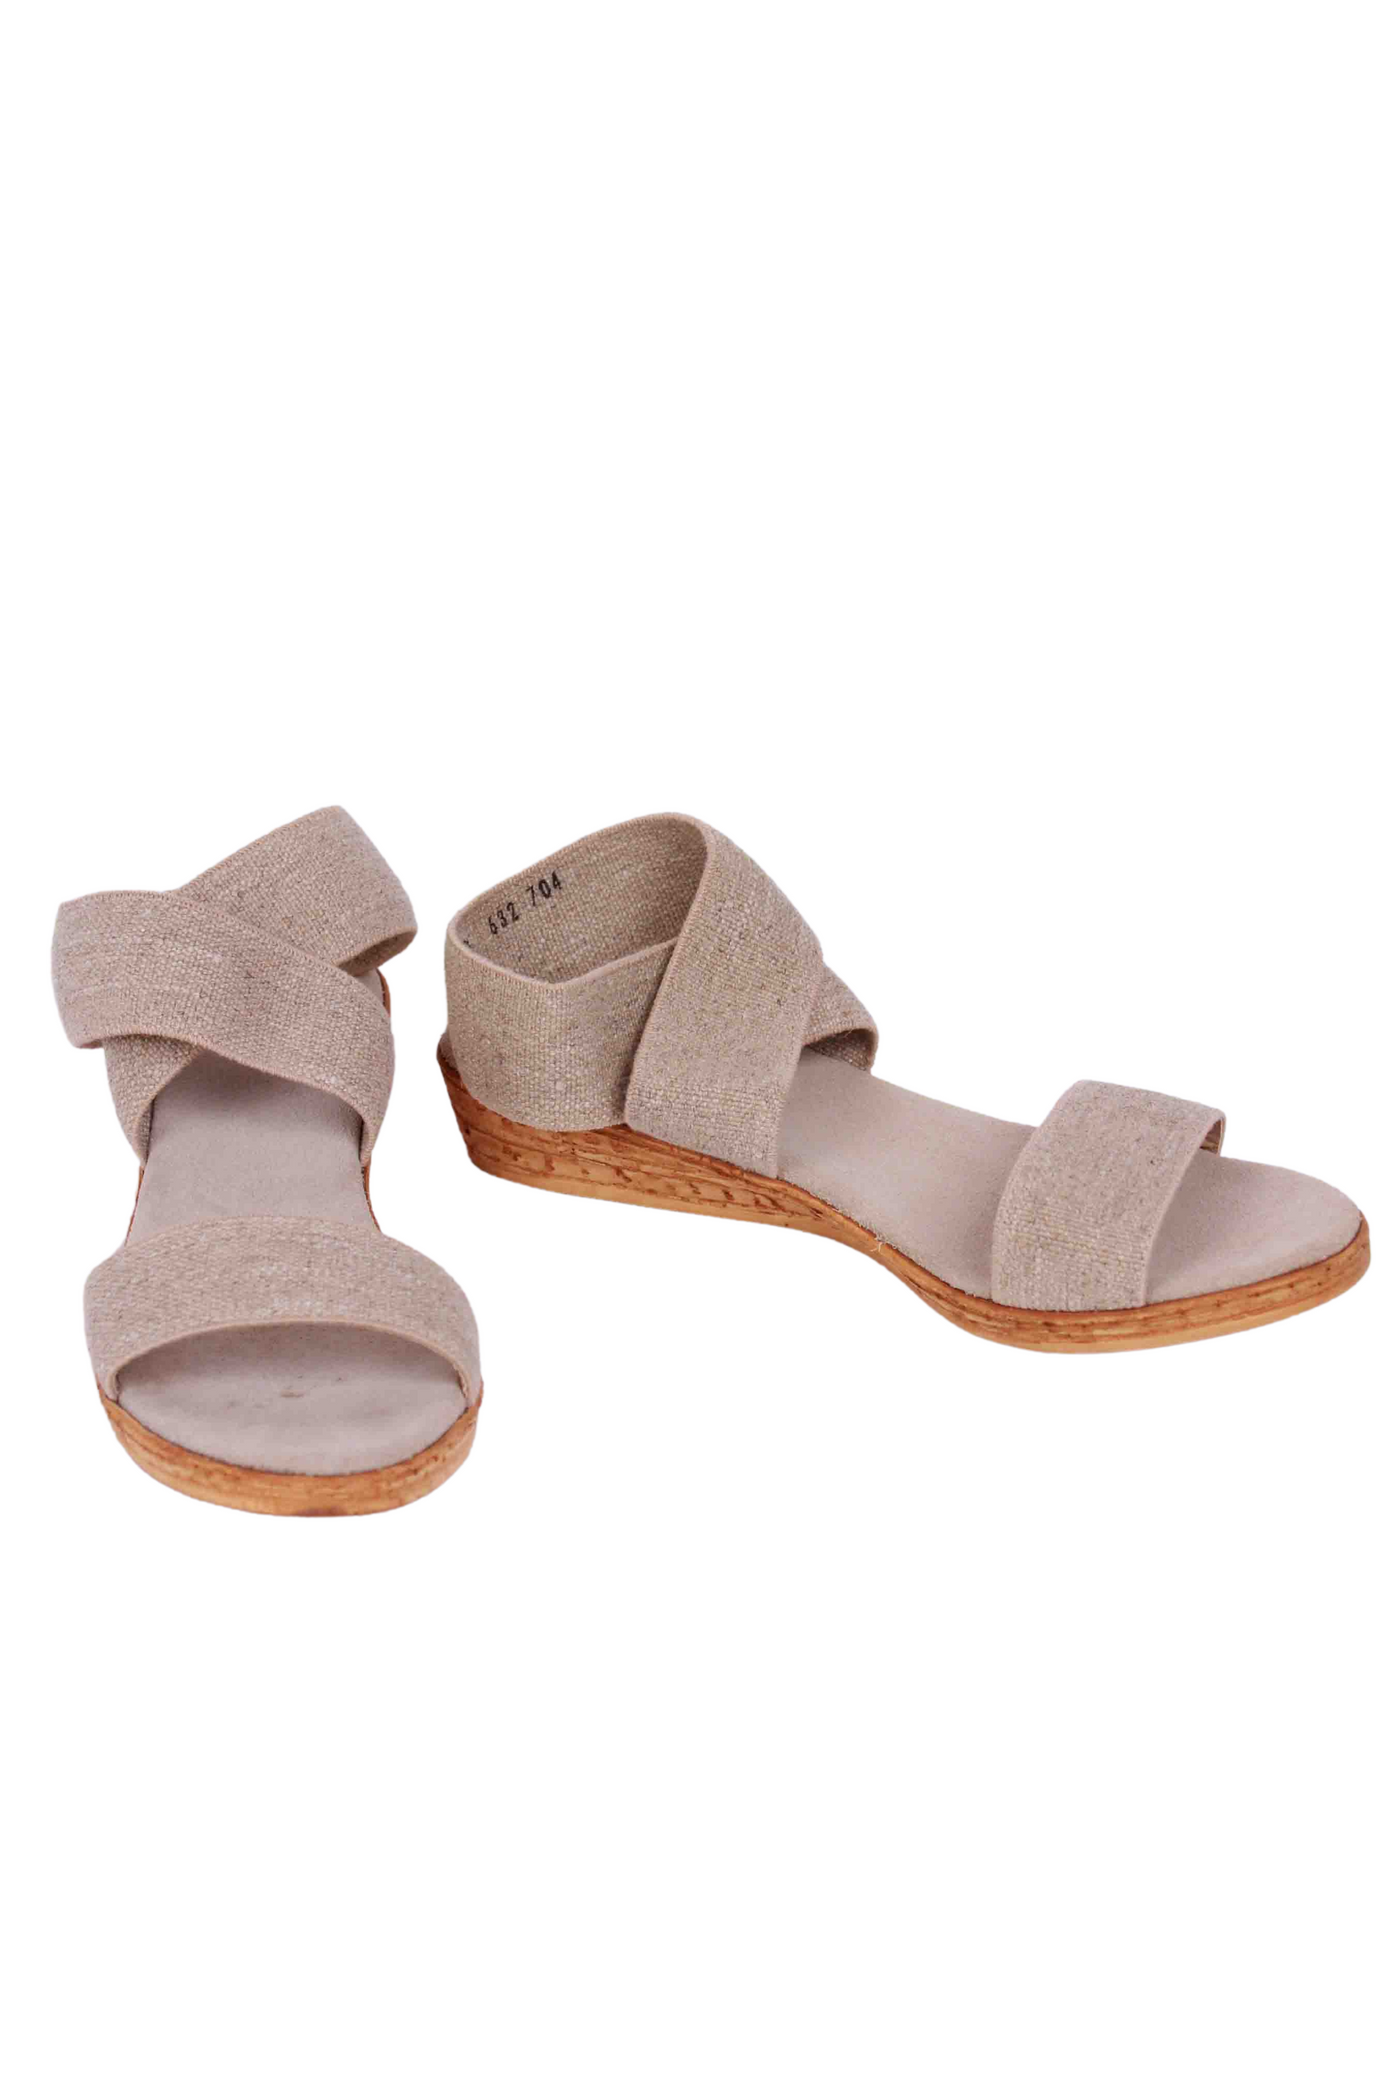 side view of Linen Benjamin Sandal by Charleston Shoe Company